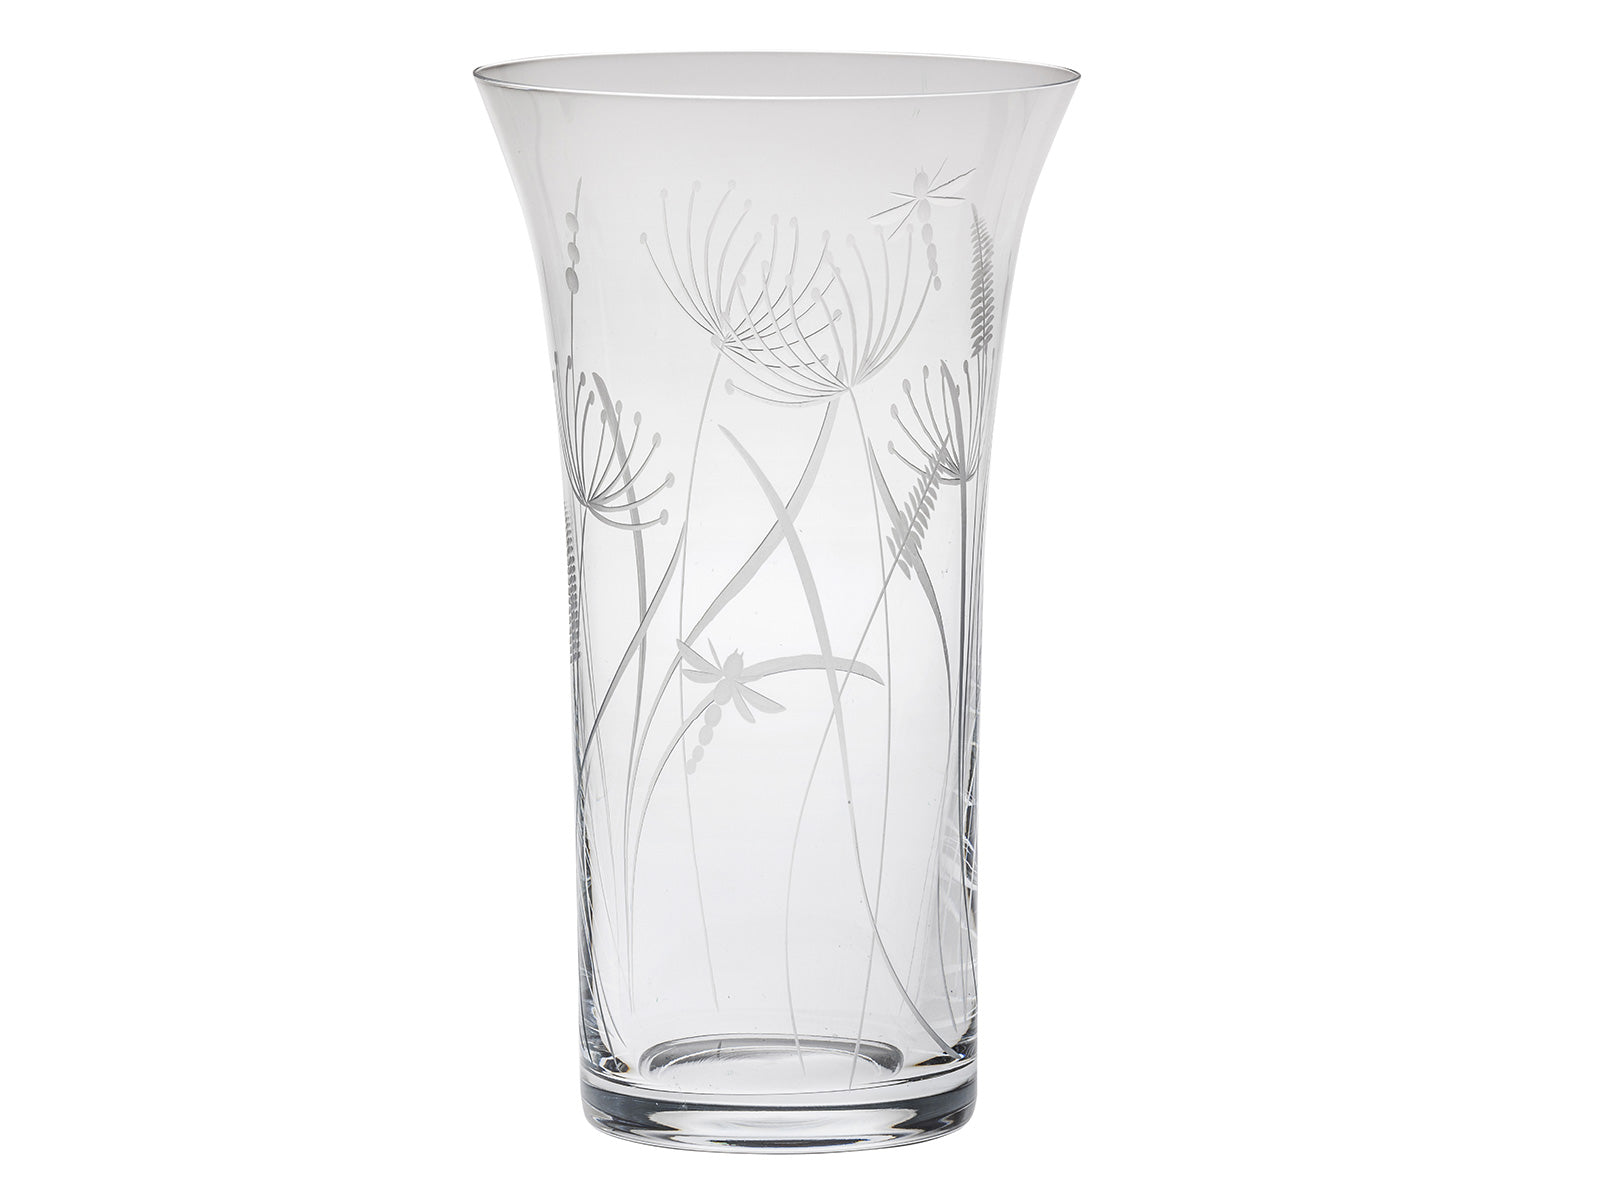 Royal Scot Crystal Dragonfly Vase - Flared / Large is crafted of a hand-cut crystal in Britain and engraved with swaying dandelions and bulrushes, along with a pair of dragonflies flying amongst them. A wider vase than its younger sibling, it has a straight body that opens out into a flared top.